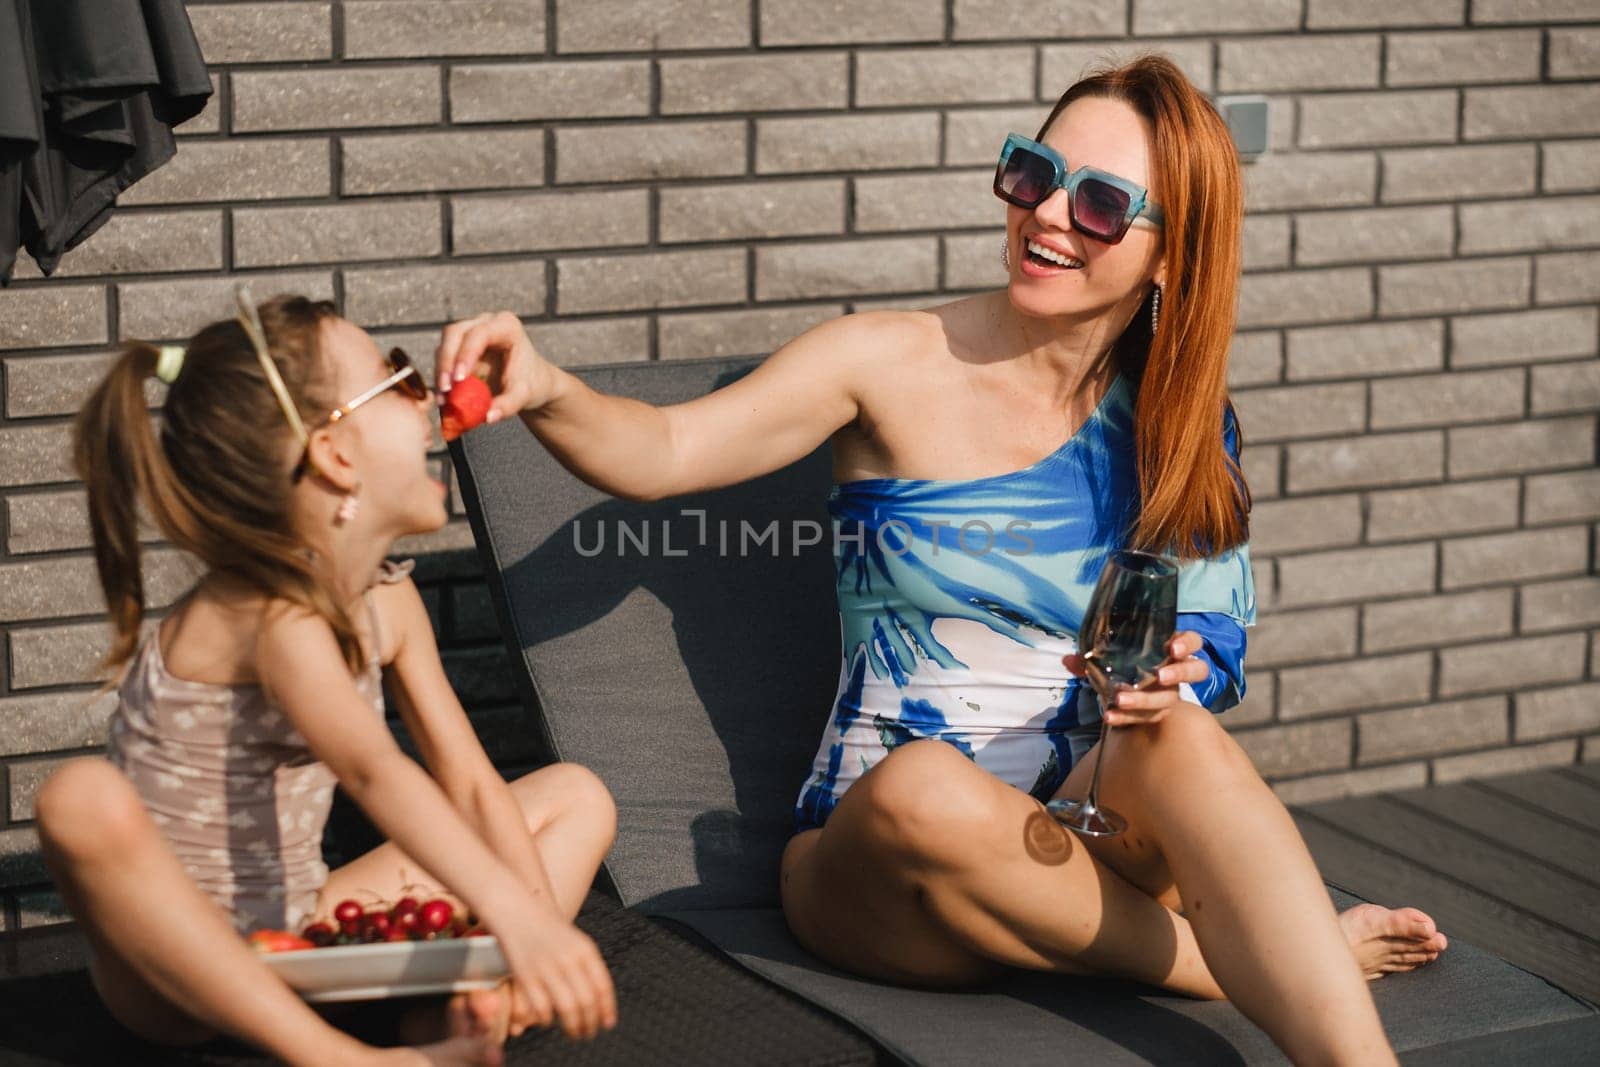 A happy family in swimsuits sunbathes on their terrace in summer. Mom feeds her daughter strawberries.